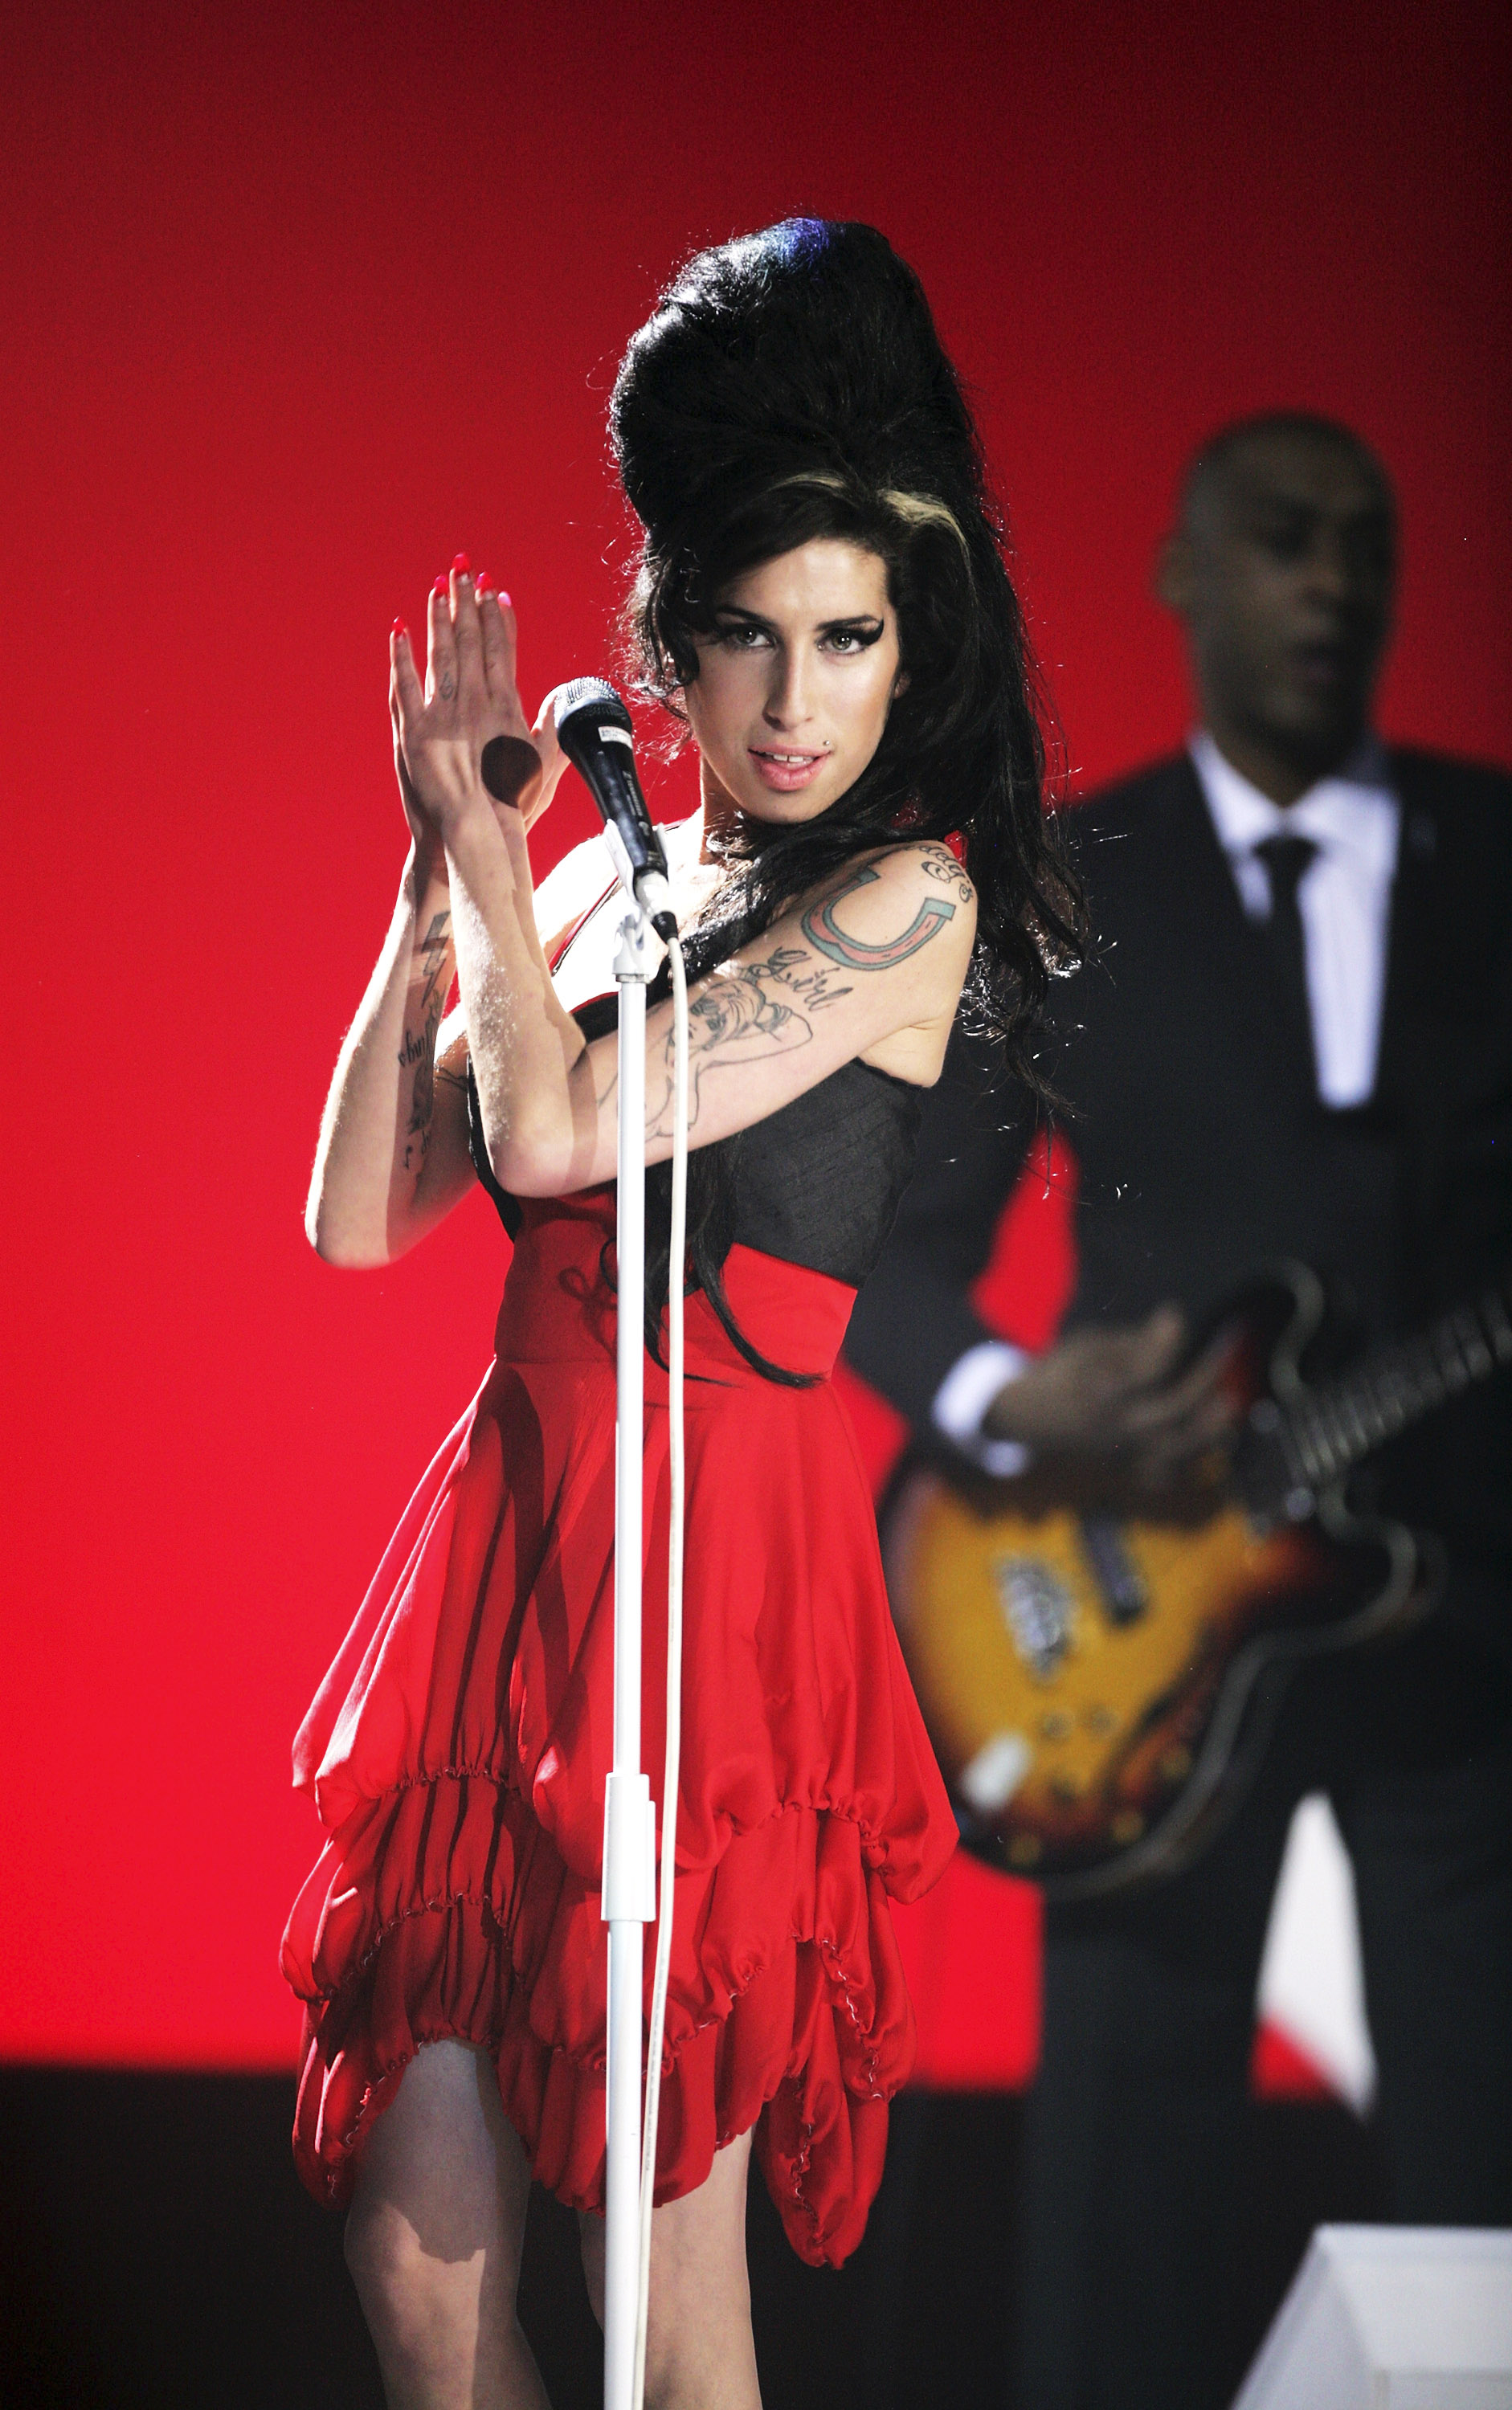 Amy, with Dale on bass, performing at the 2007 Brit Awards